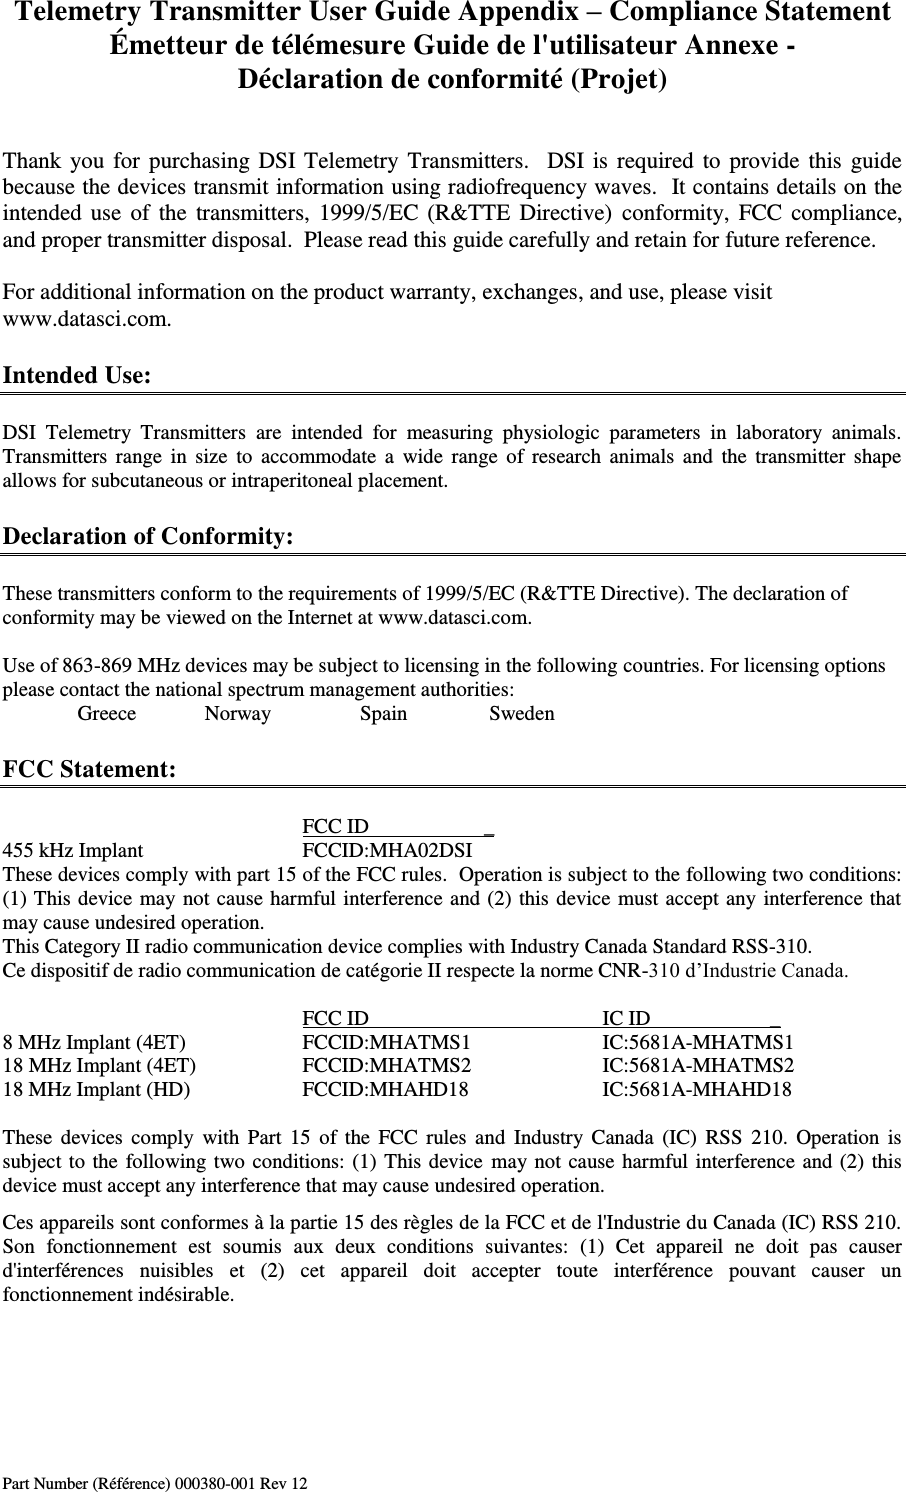 Telemetry Transmitter User Guide Appendix – Compliance Statement Émetteur de télémesure Guide de l&apos;utilisateur Annexe - Déclaration de conformité (Projet) Part Number (Référence) 000380-001 Rev 12   Thank you for purchasing DSI Telemetry Transmitters.   DSI is  required  to provide this guide because the devices transmit information using radiofrequency waves.  It contains details on the intended use  of  the transmitters, 1999/5/EC (R&amp;TTE  Directive)  conformity, FCC  compliance, and proper transmitter disposal.  Please read this guide carefully and retain for future reference.  For additional information on the product warranty, exchanges, and use, please visit www.datasci.com.  Intended Use:  DSI  Telemetry  Transmitters  are  intended  for  measuring  physiologic  parameters  in  laboratory  animals.  Transmitters  range  in  size  to  accommodate  a  wide  range  of  research  animals  and  the  transmitter  shape allows for subcutaneous or intraperitoneal placement.  Declaration of Conformity:  These transmitters conform to the requirements of 1999/5/EC (R&amp;TTE Directive). The declaration of conformity may be viewed on the Internet at www.datasci.com.            Use of 863-869 MHz devices may be subject to licensing in the following countries. For licensing options please contact the national spectrum management authorities:   Greece            Norway             Spain         Sweden            FCC Statement:          FCC ID          _ 455 kHz Implant      FCCID:MHA02DSI These devices comply with part 15 of the FCC rules.  Operation is subject to the following two conditions: (1) This device may not cause harmful interference and (2) this device must accept any interference that may cause undesired operation. This Category II radio communication device complies with Industry Canada Standard RSS-310.  Ce dispositif de radio communication de catégorie II respecte la norme CNR-310 d’Industrie Canada.           FCC ID        IC ID                       _ 8 MHz Implant (4ET)    FCCID:MHATMS1    IC:5681A-MHATMS1 18 MHz Implant (4ET)    FCCID:MHATMS2    IC:5681A-MHATMS2 18 MHz Implant (HD)     FCCID:MHAHD18    IC:5681A-MHAHD18  These  devices  comply  with Part  15  of  the  FCC  rules  and  Industry  Canada  (IC)  RSS  210.  Operation  is subject to the following two conditions: (1) This device  may not cause harmful interference and (2) this device must accept any interference that may cause undesired operation. Ces appareils sont conformes à la partie 15 des règles de la FCC et de l&apos;Industrie du Canada (IC) RSS 210. Son  fonctionnement  est  soumis  aux  deux  conditions  suivantes:  (1)  Cet  appareil  ne  doit  pas  causer d&apos;interférences  nuisibles  et  (2)  cet  appareil  doit  accepter  toute  interférence  pouvant  causer  un fonctionnement indésirable.    